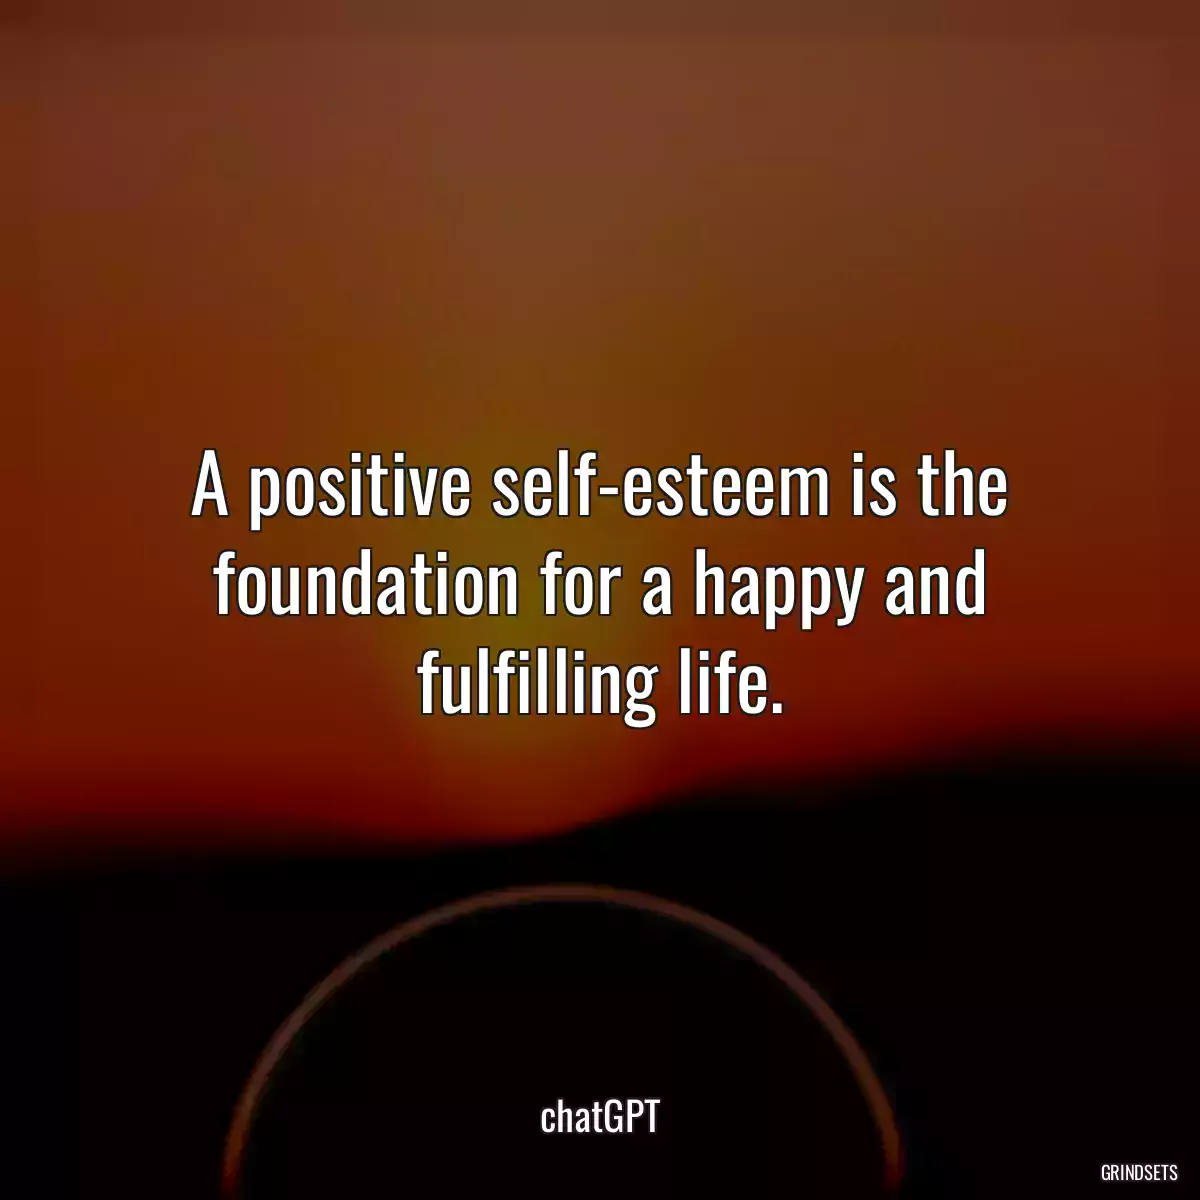 A positive self-esteem is the foundation for a happy and fulfilling life.